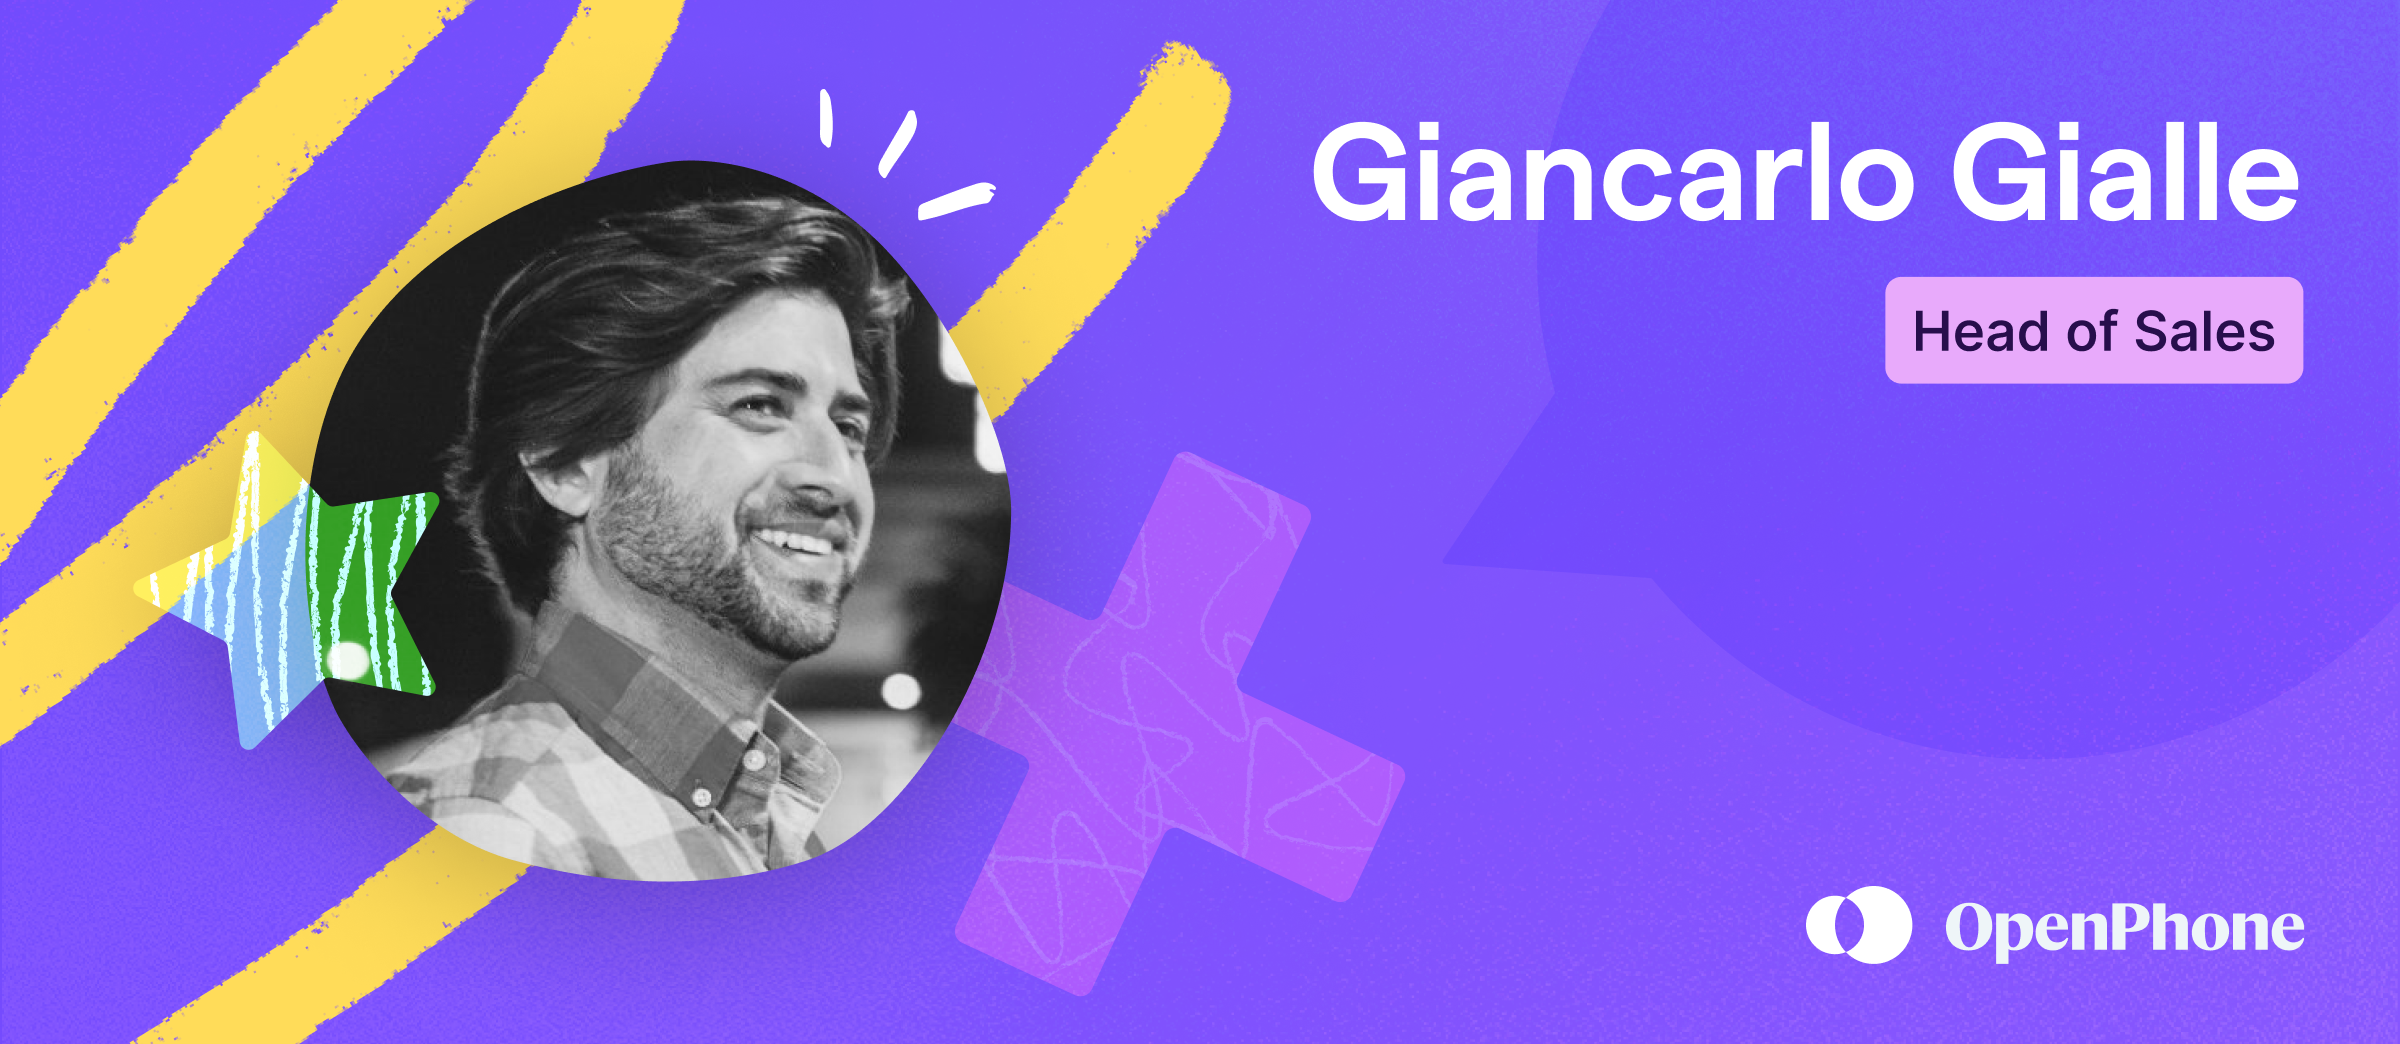 Giancarlo Gialle - Head of Sales at OpenPhone